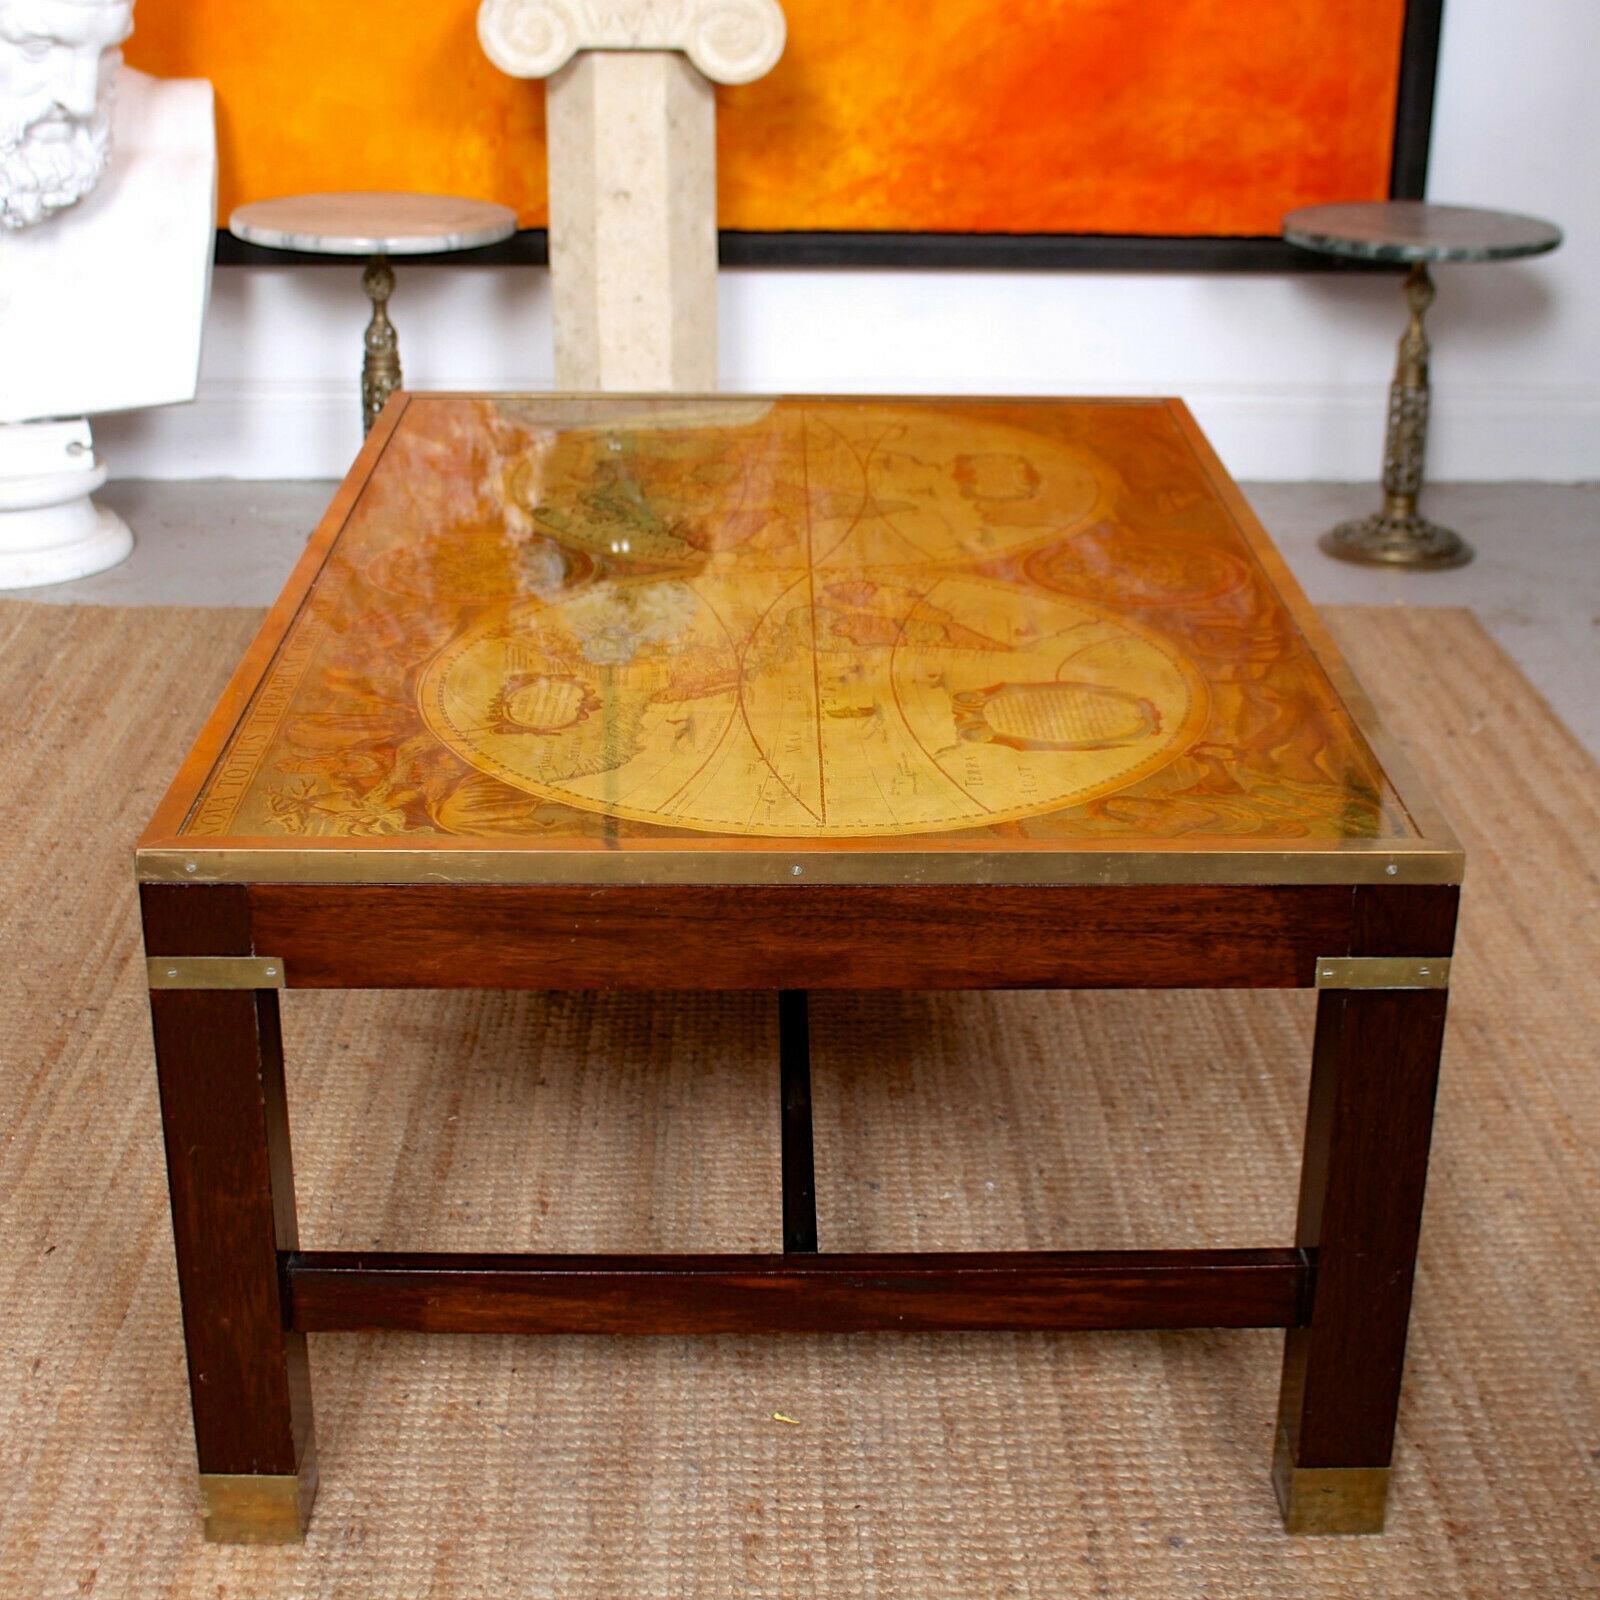 An impressive vintage glazed globe coffee table in the Campaign style.
The top with a glass topped enamel painted world map with brass trimmed edges and raised on a carved chamfered solid hardwood frame.
England, 20th century.